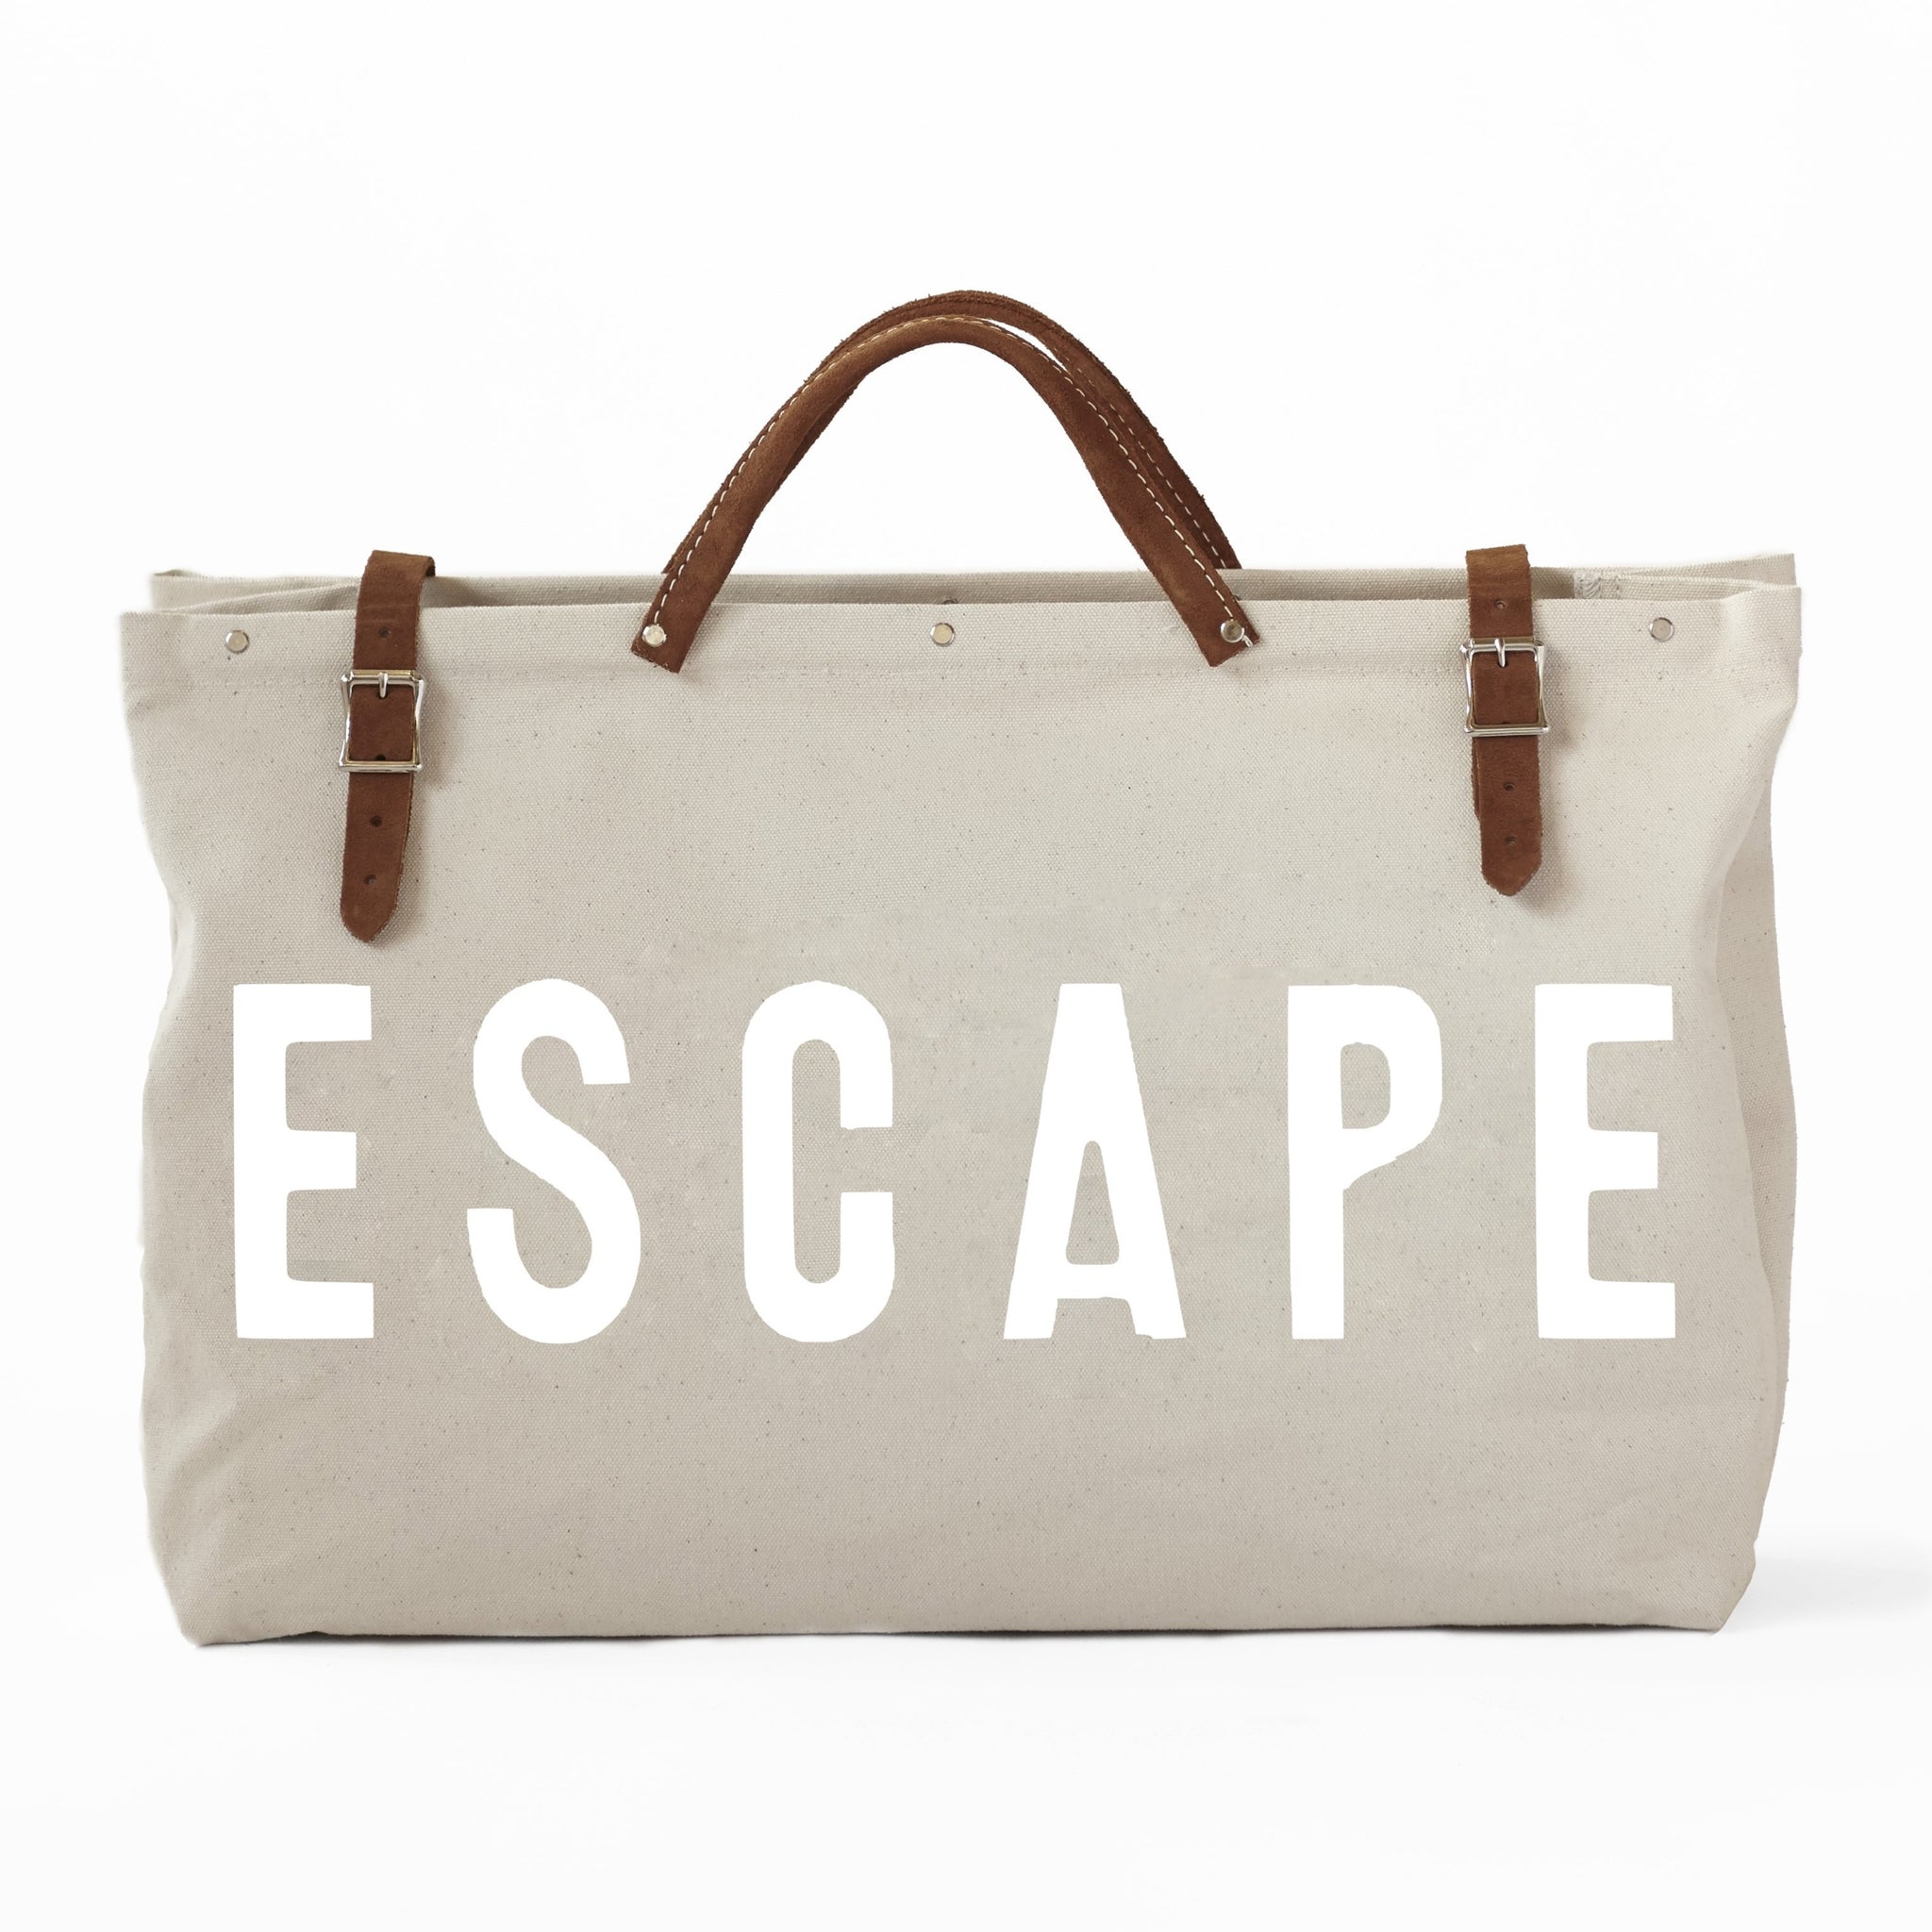 LIMITED EDITION - Forestbound ESCAPE Canvas Utility Bag, White on White